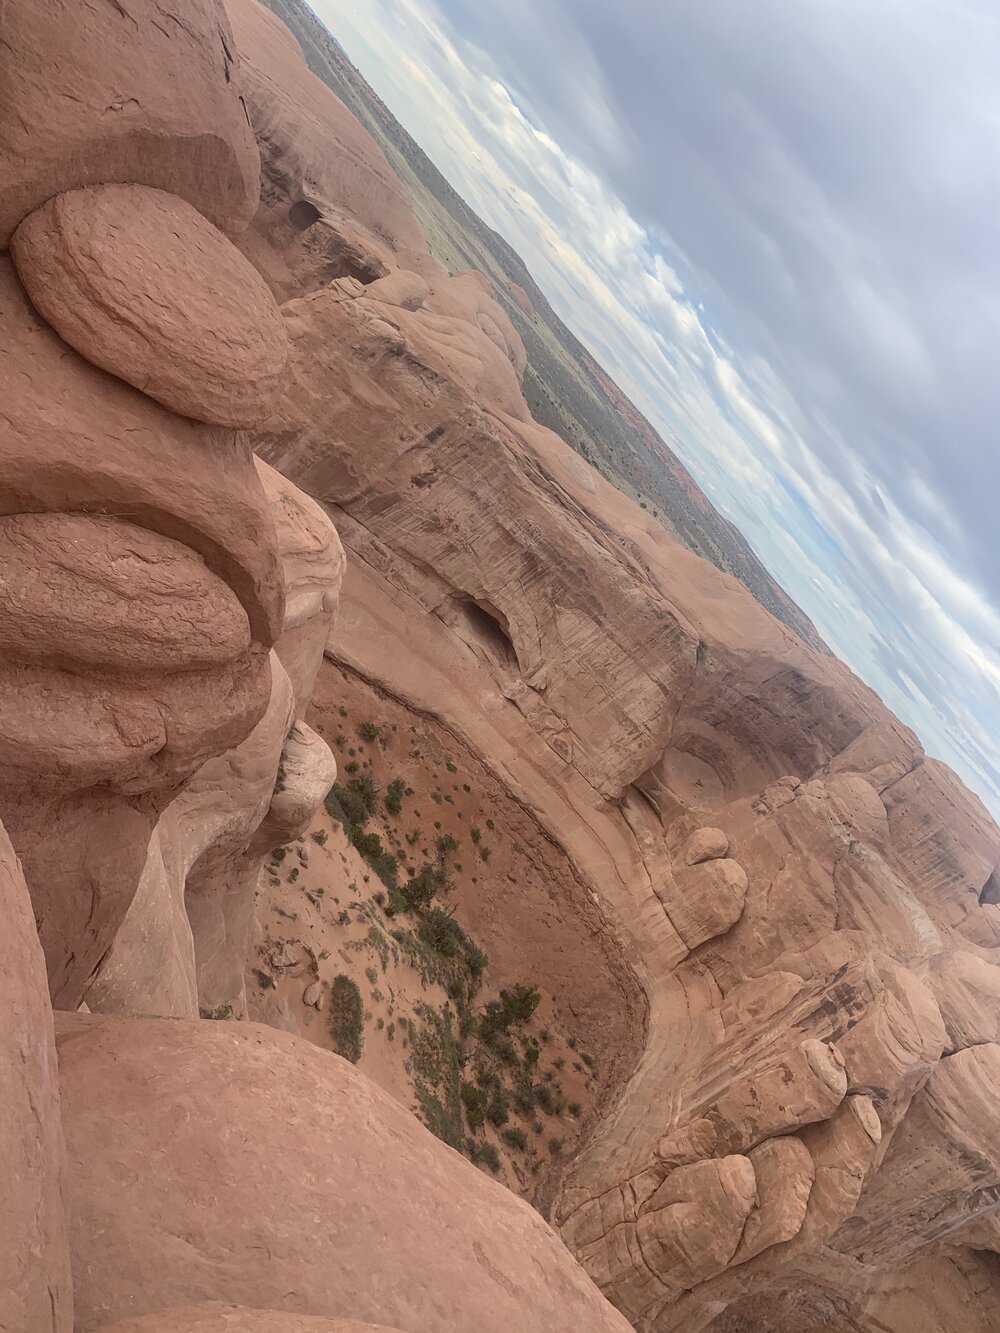  Some of the amazing geological formations around and near The Delicate Arch 